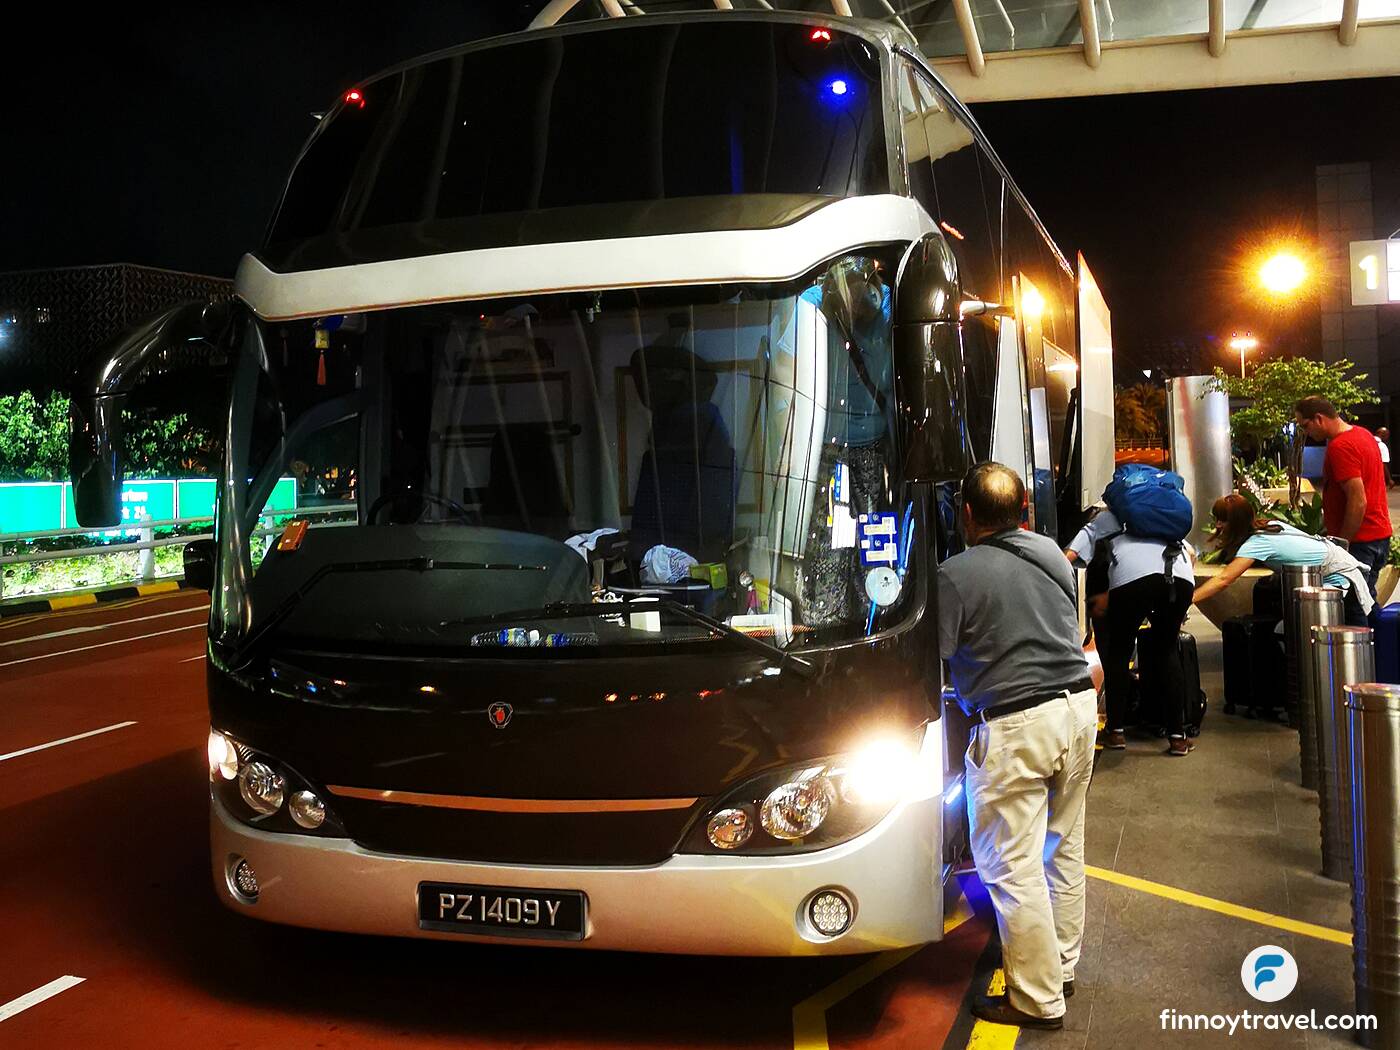 shuttle bus in Grand Park City Hall Hotel taking passengers affected by cancelled Lufthansa flight